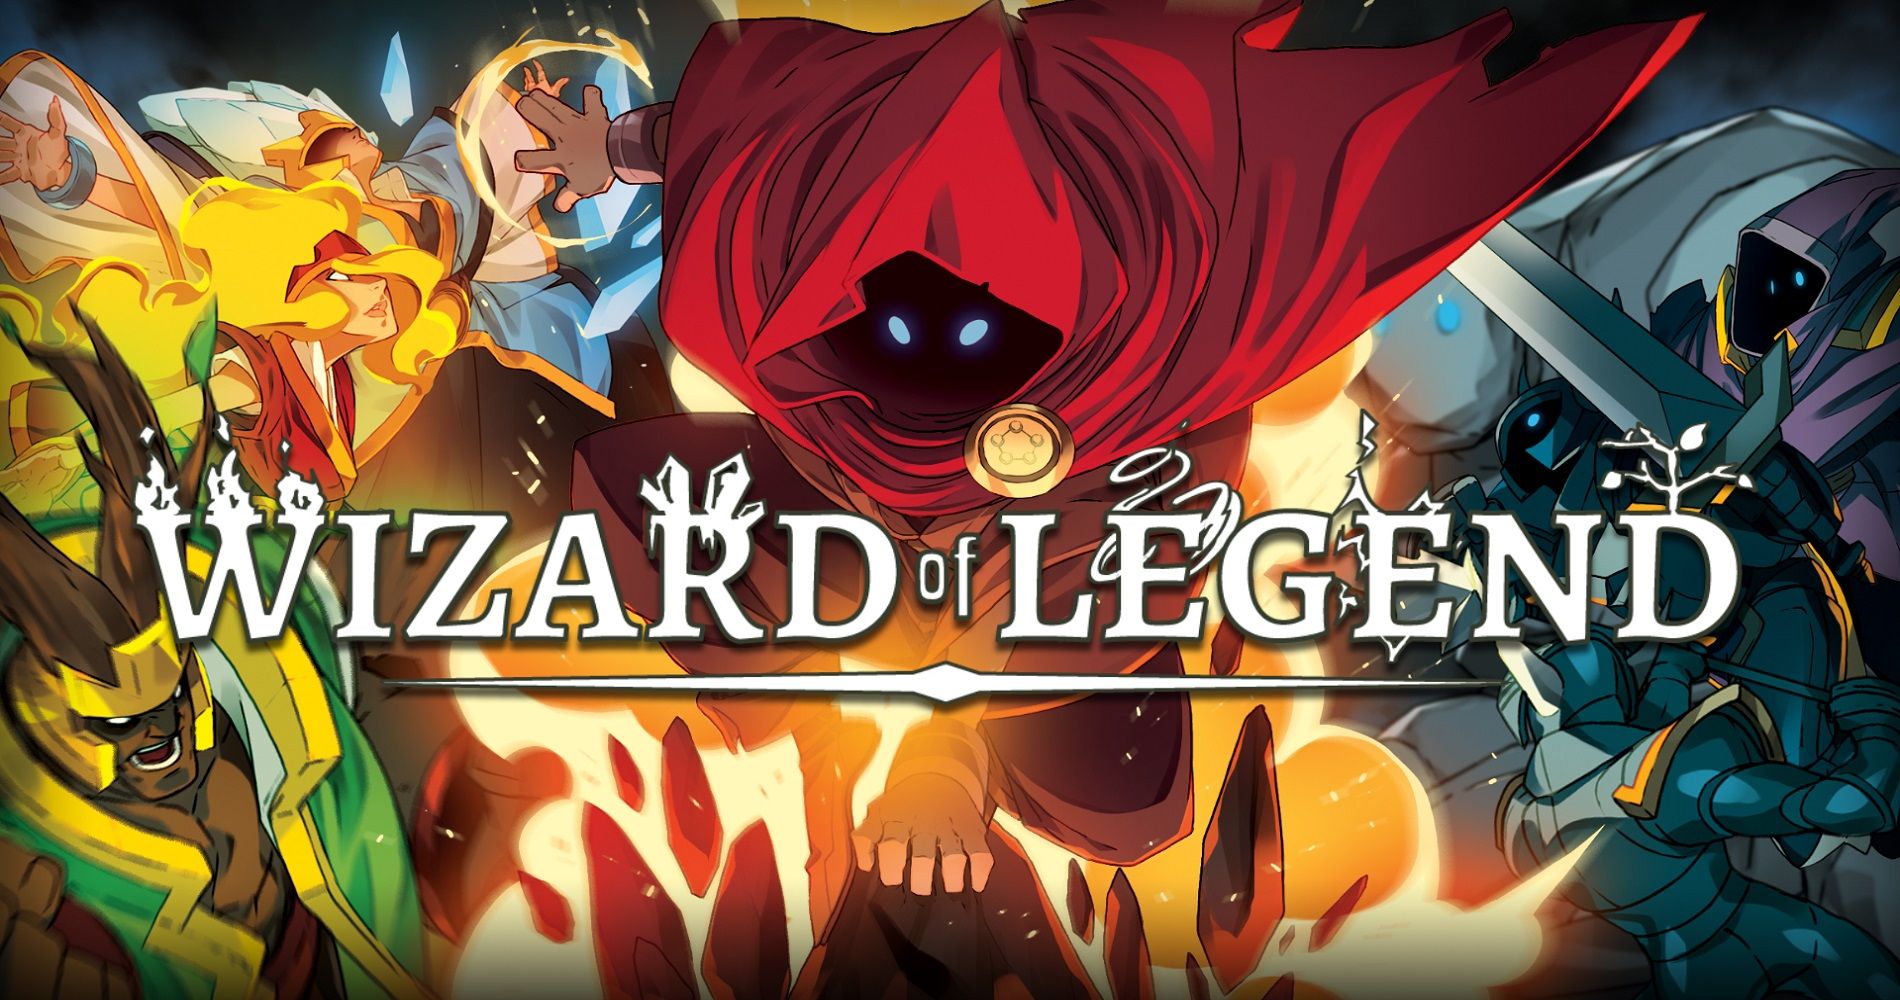 Wizard of Legend 2 announced